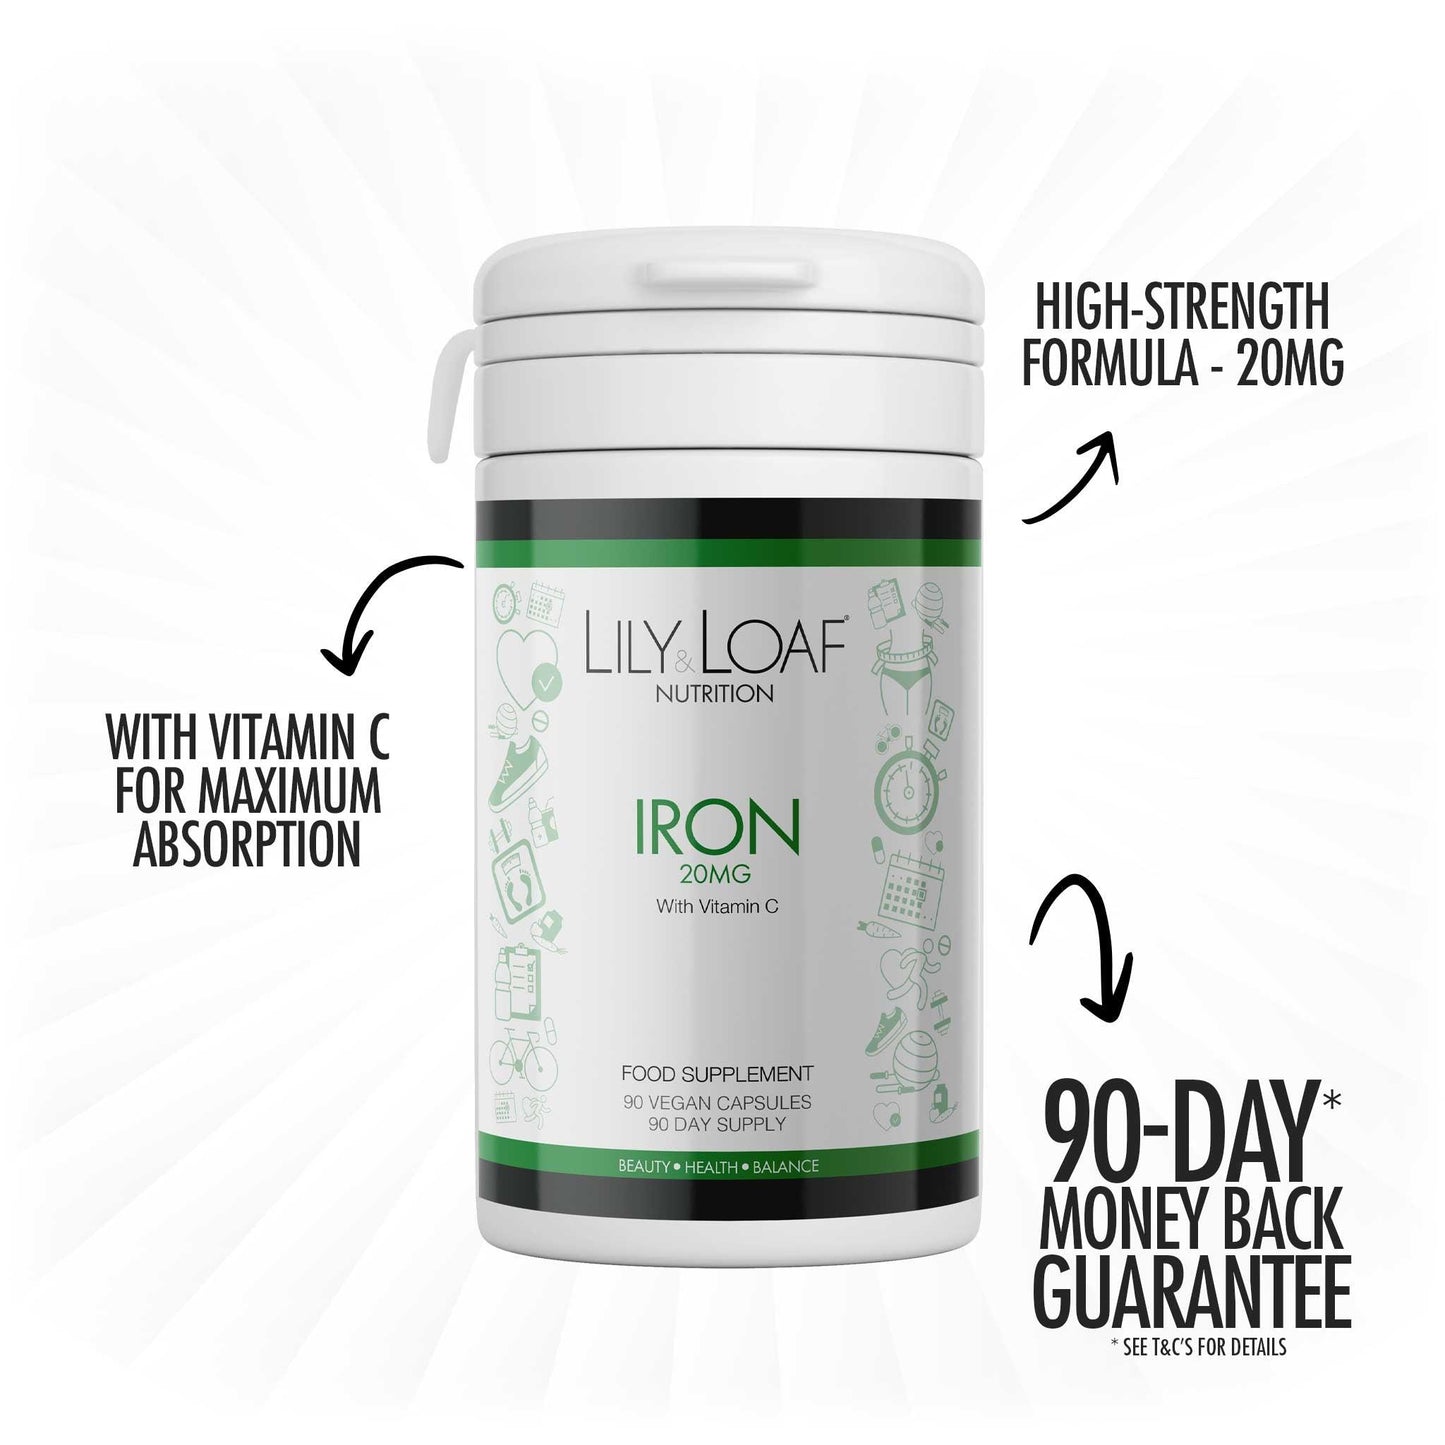 Lily & Loaf Iron supplement bottle with 90 vegan capsules, 20mg high-strength formula, and Vitamin C for maximum absorption. Features a 90-day money-back guarantee.